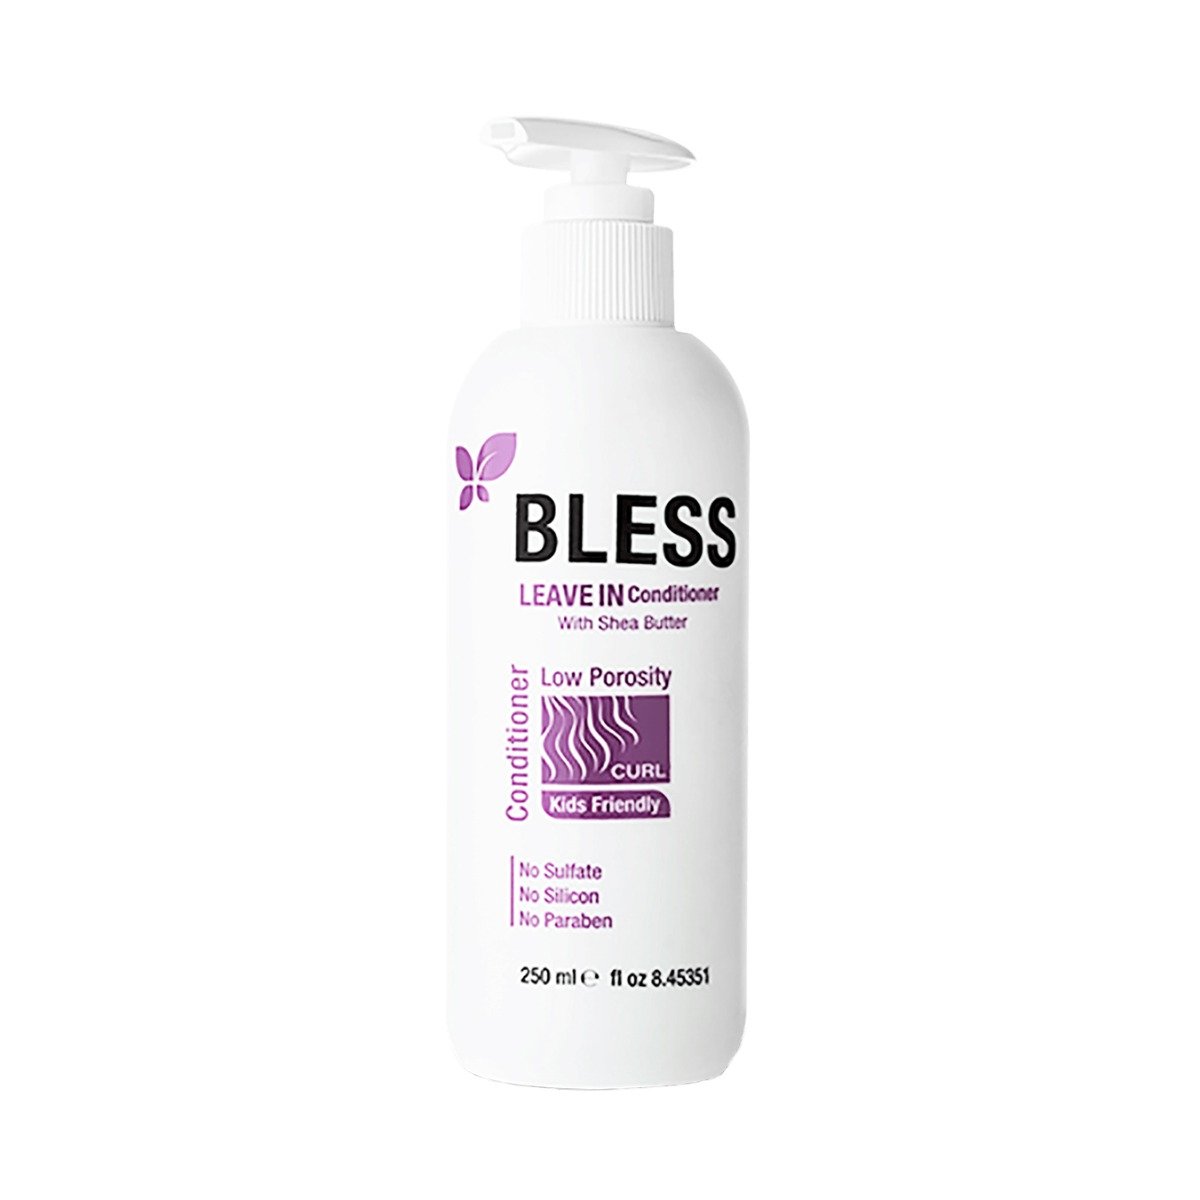 Bless Leave In Conditioner - 250ml - Bloom Pharmacy